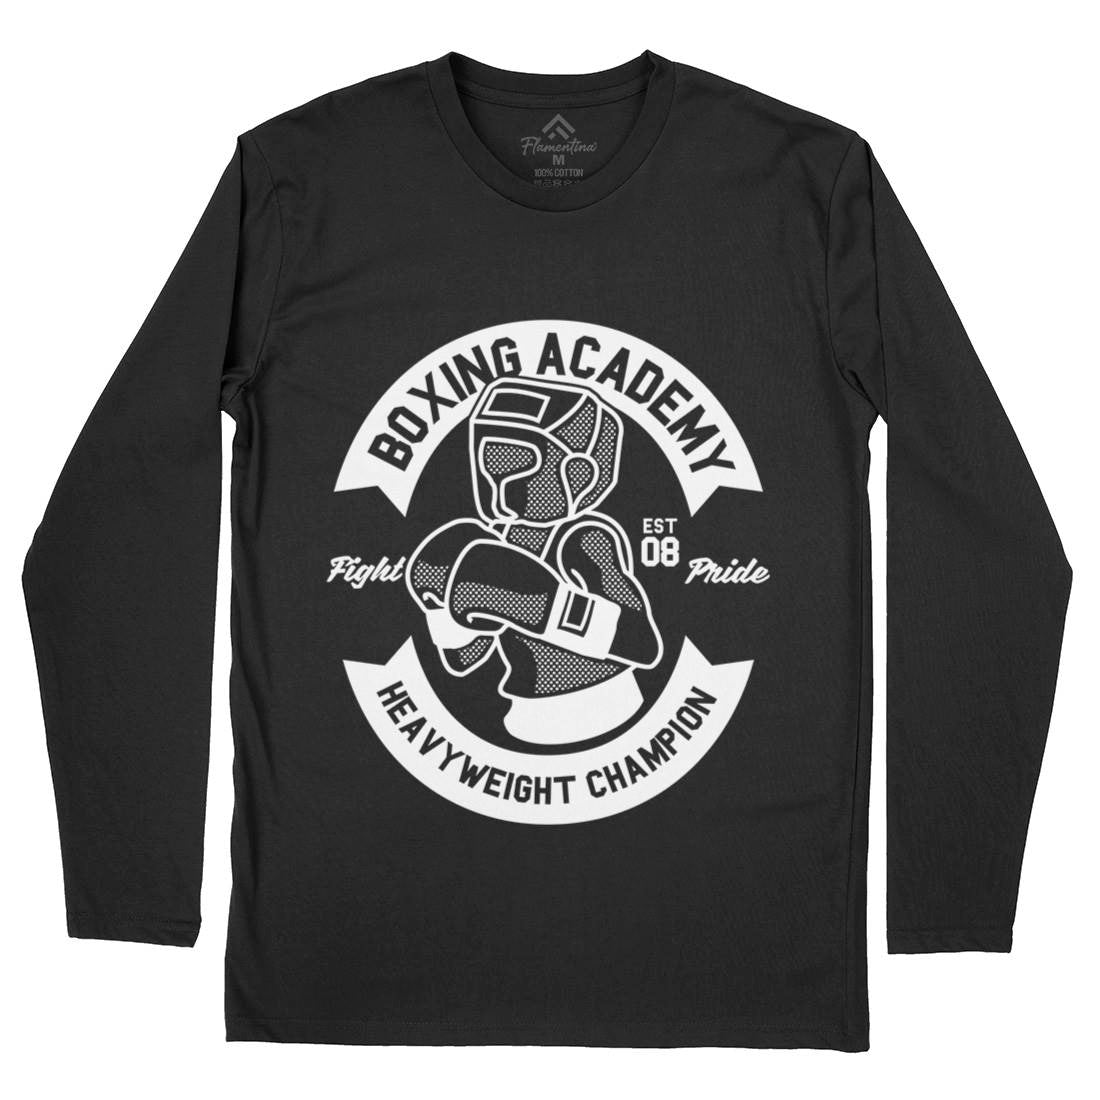 Boxing Academy Mens Long Sleeve T-Shirt Gym A213